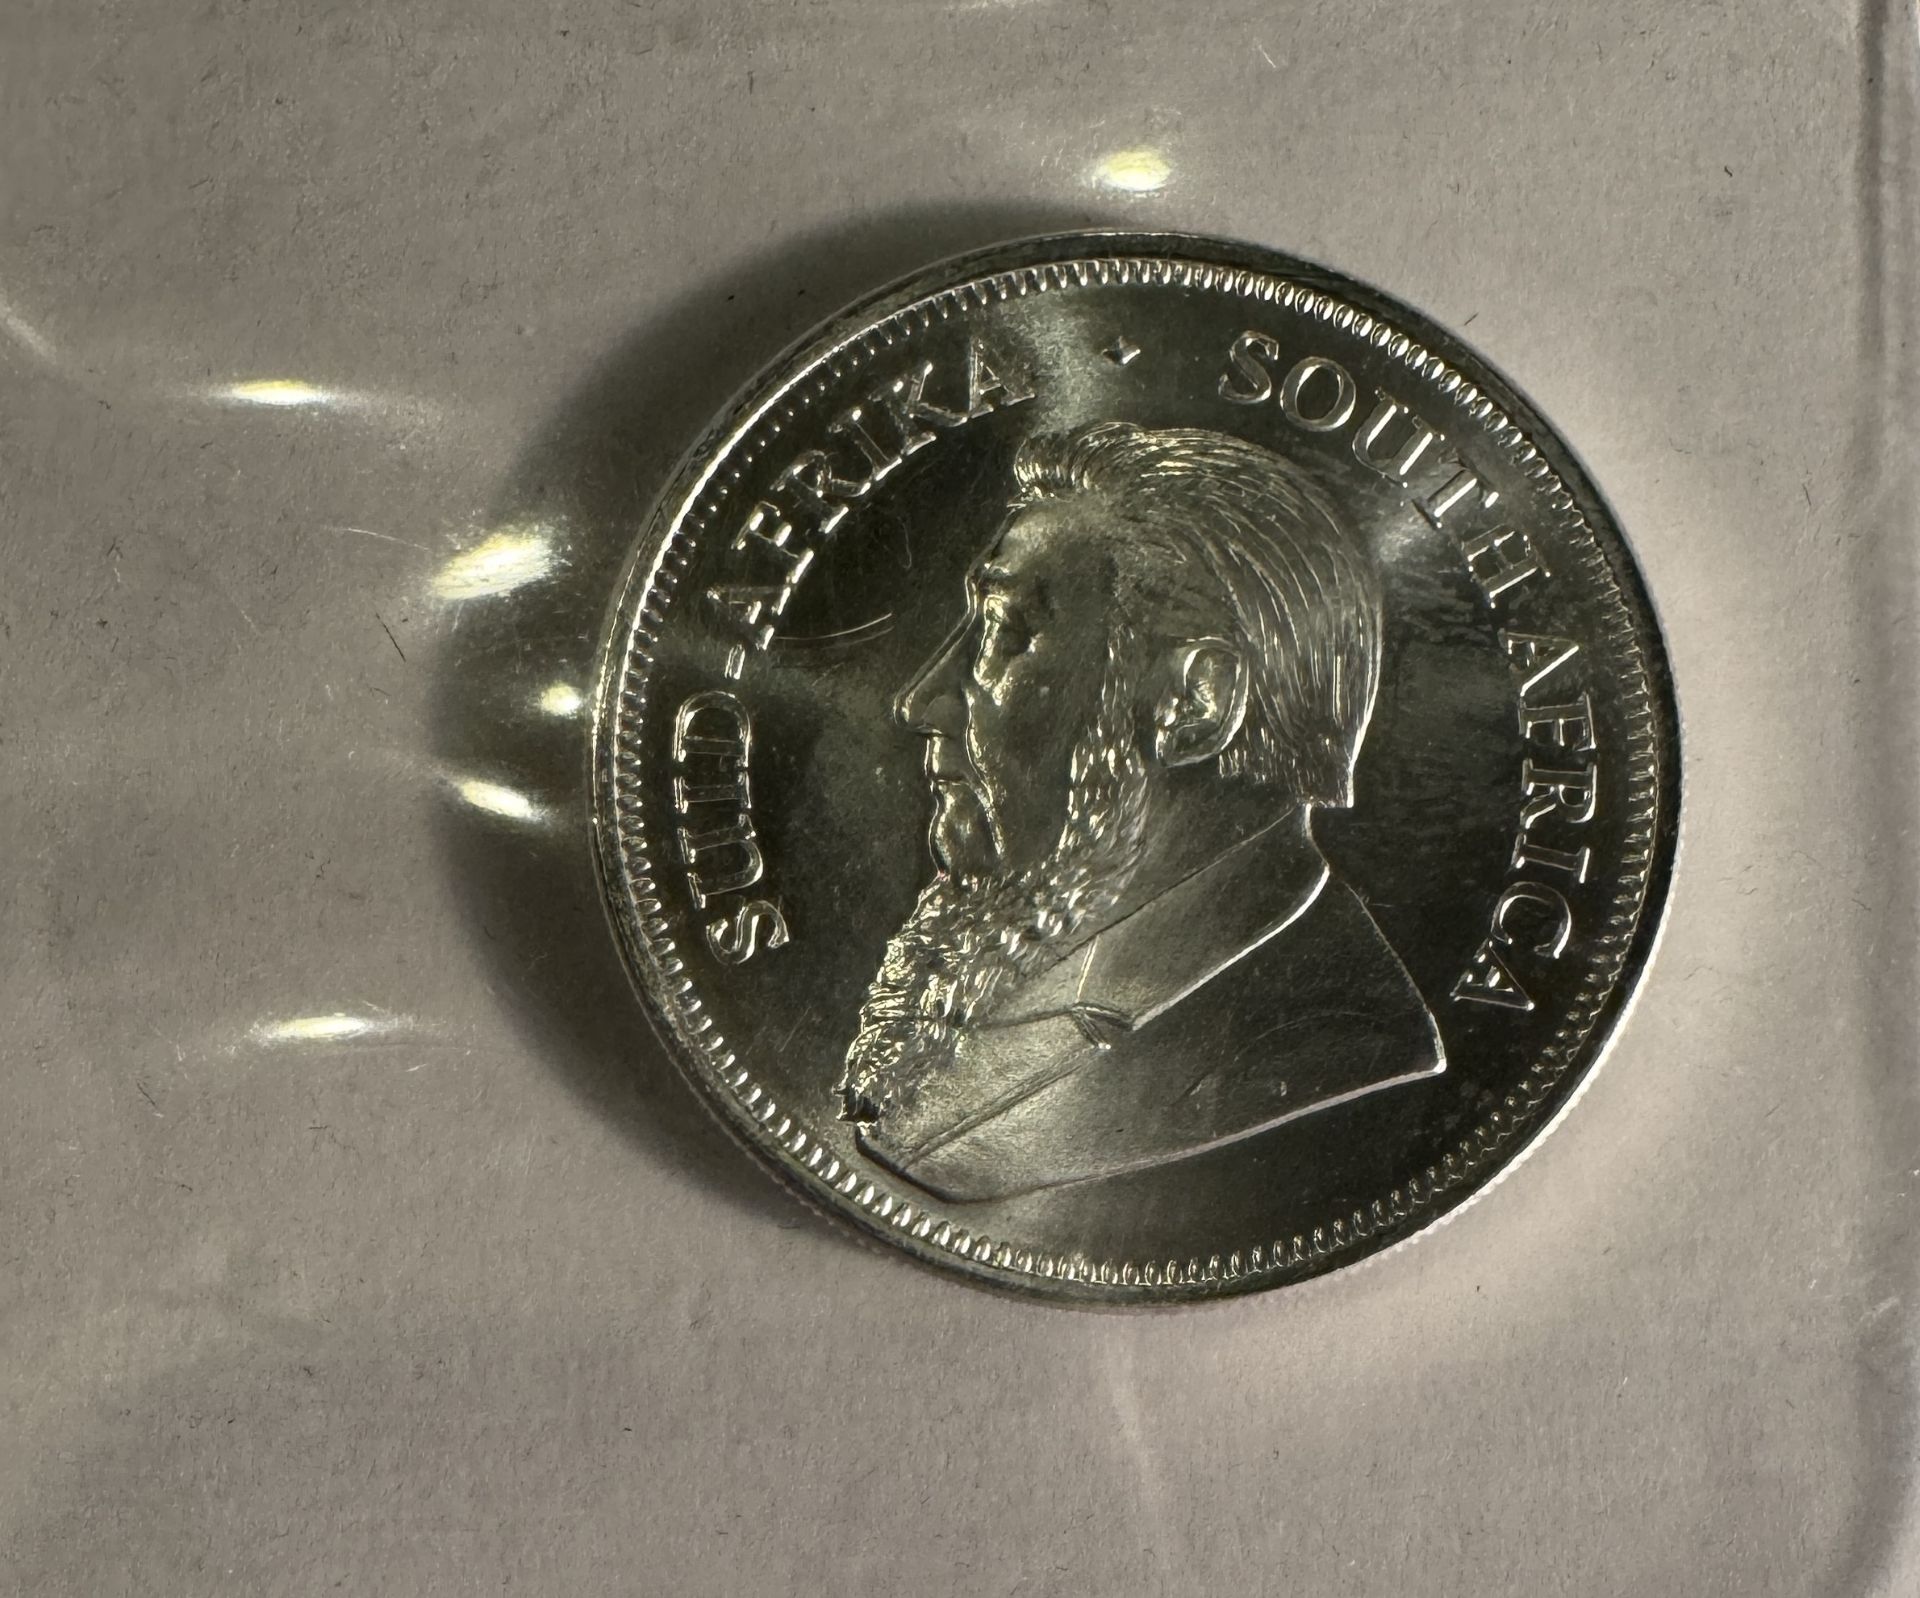 2022 1oz SILVER PIECE SOUTHAFRICA - Image 2 of 2